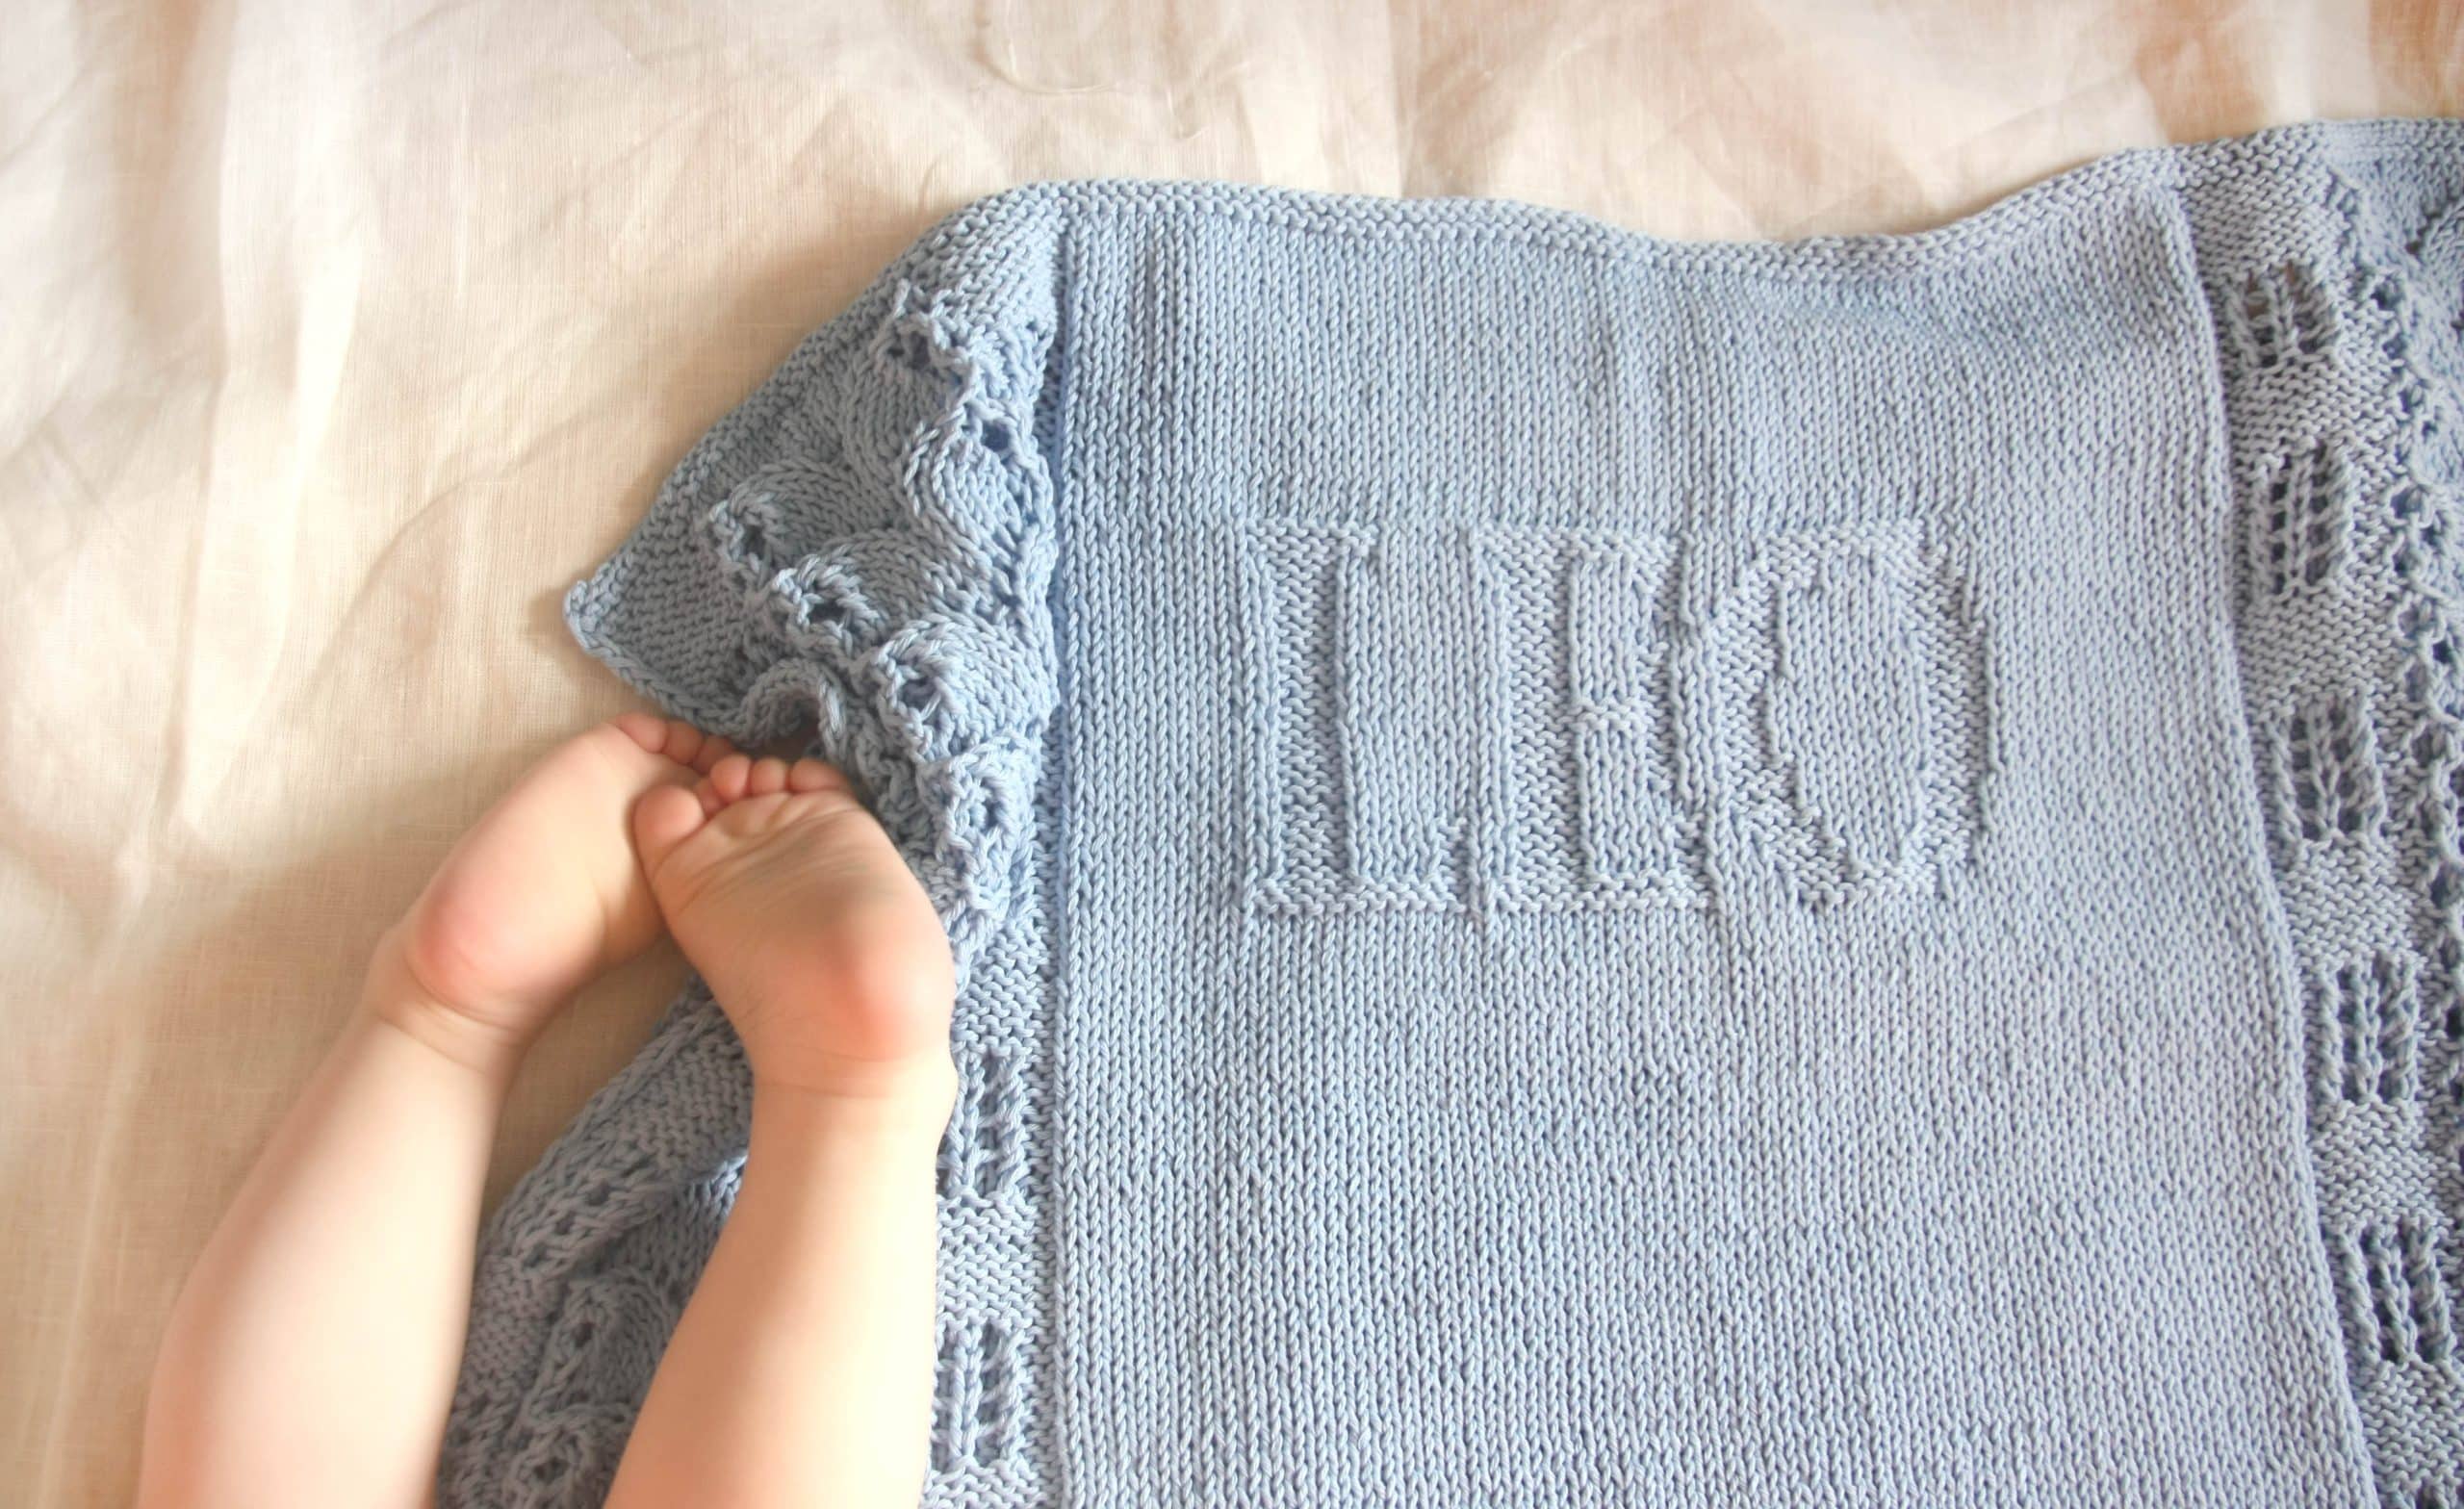 Personalized baby blanket, knitted baby blanket